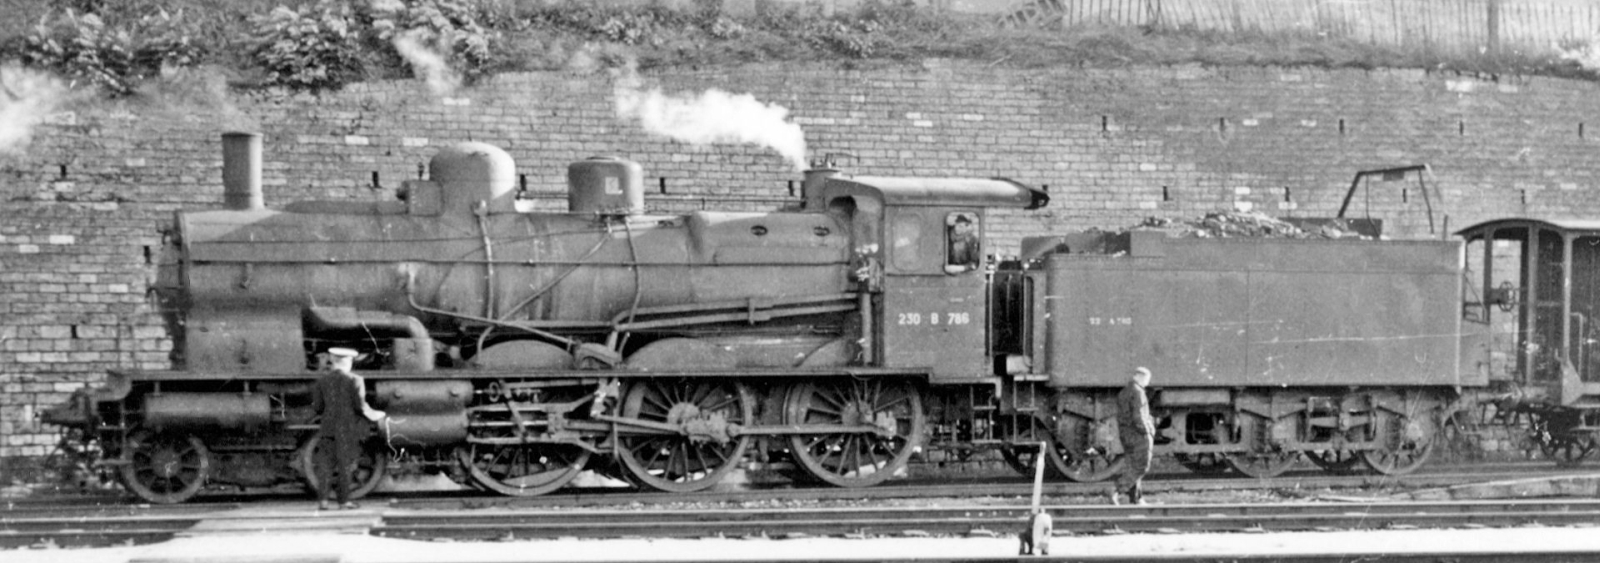 230 B 786 in 1958 in Chaumont/Marne